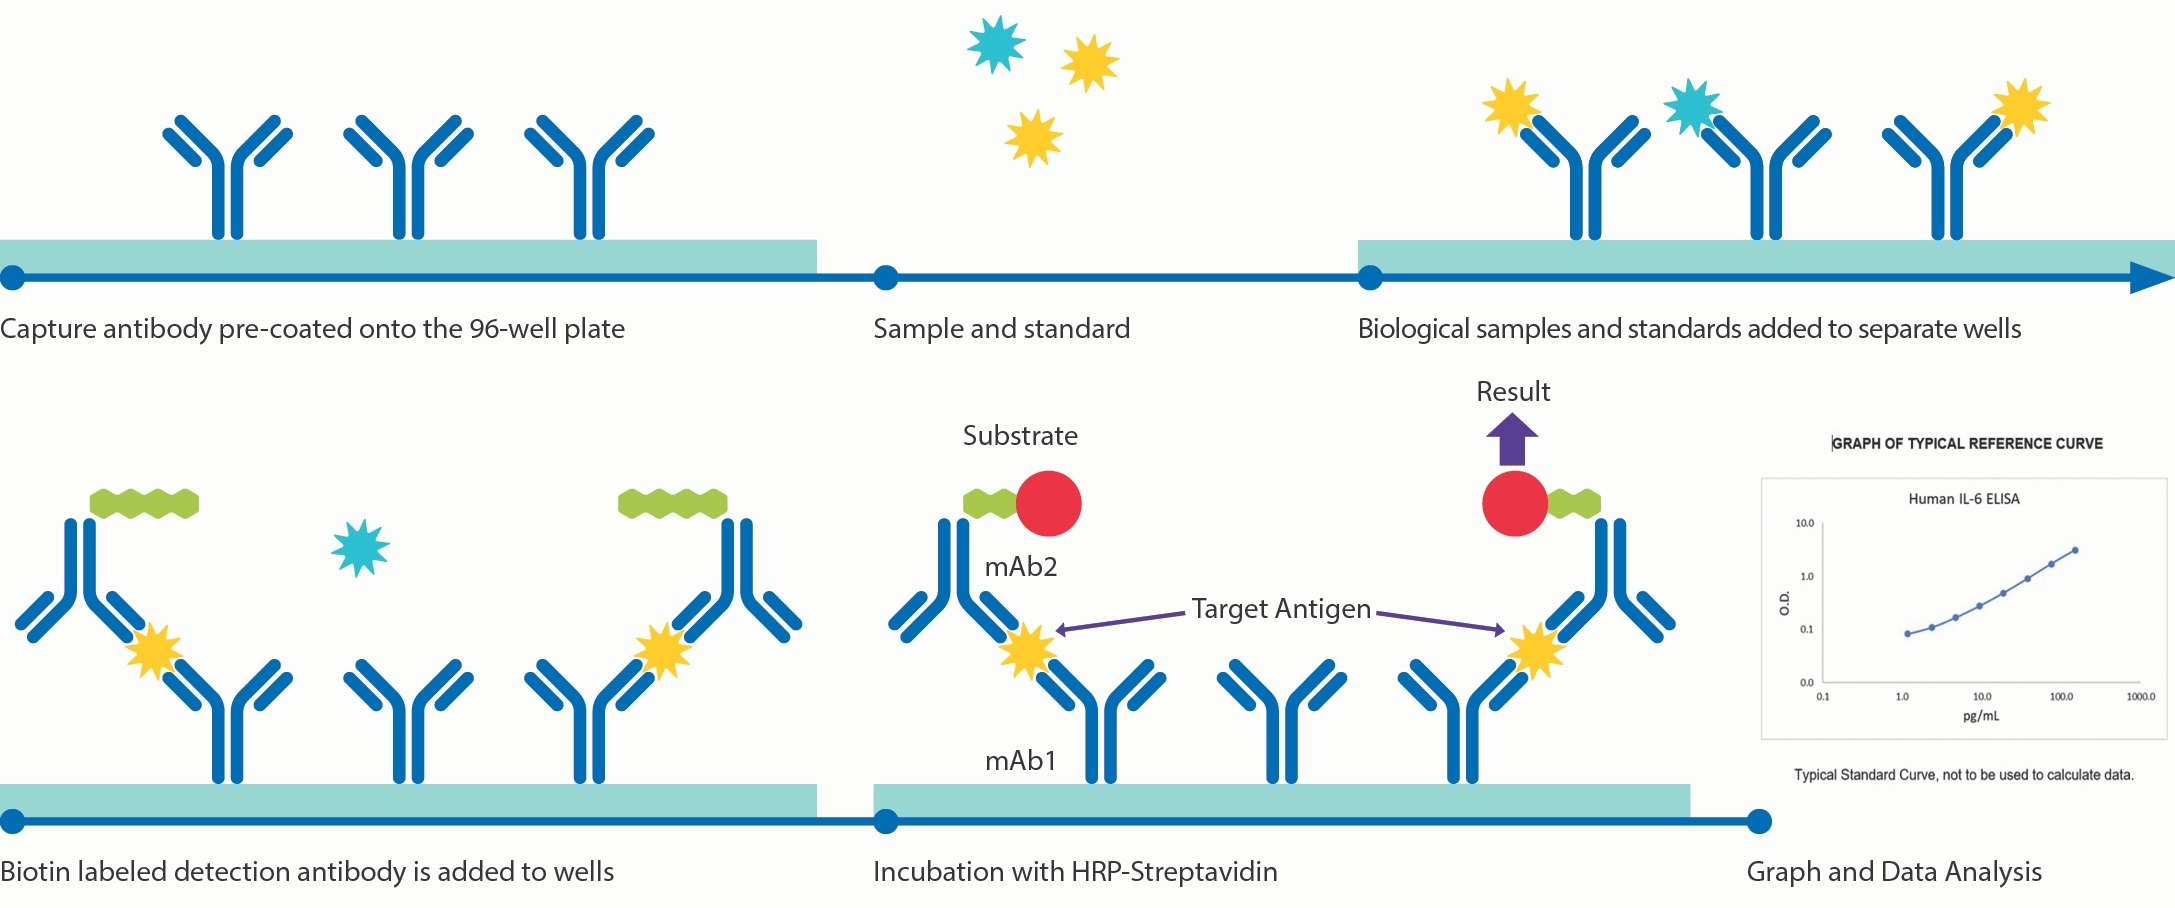 Illustration of how Conferma<sup>®</sup> ELISA assays work including pre-coating the capture antibody on a 96-well plate, adding sample/standard, adding biotin-labeled detection antibodies to the wells, incubating with horseradish peroxidase (HRP)-streptavidin, and then getting a result.